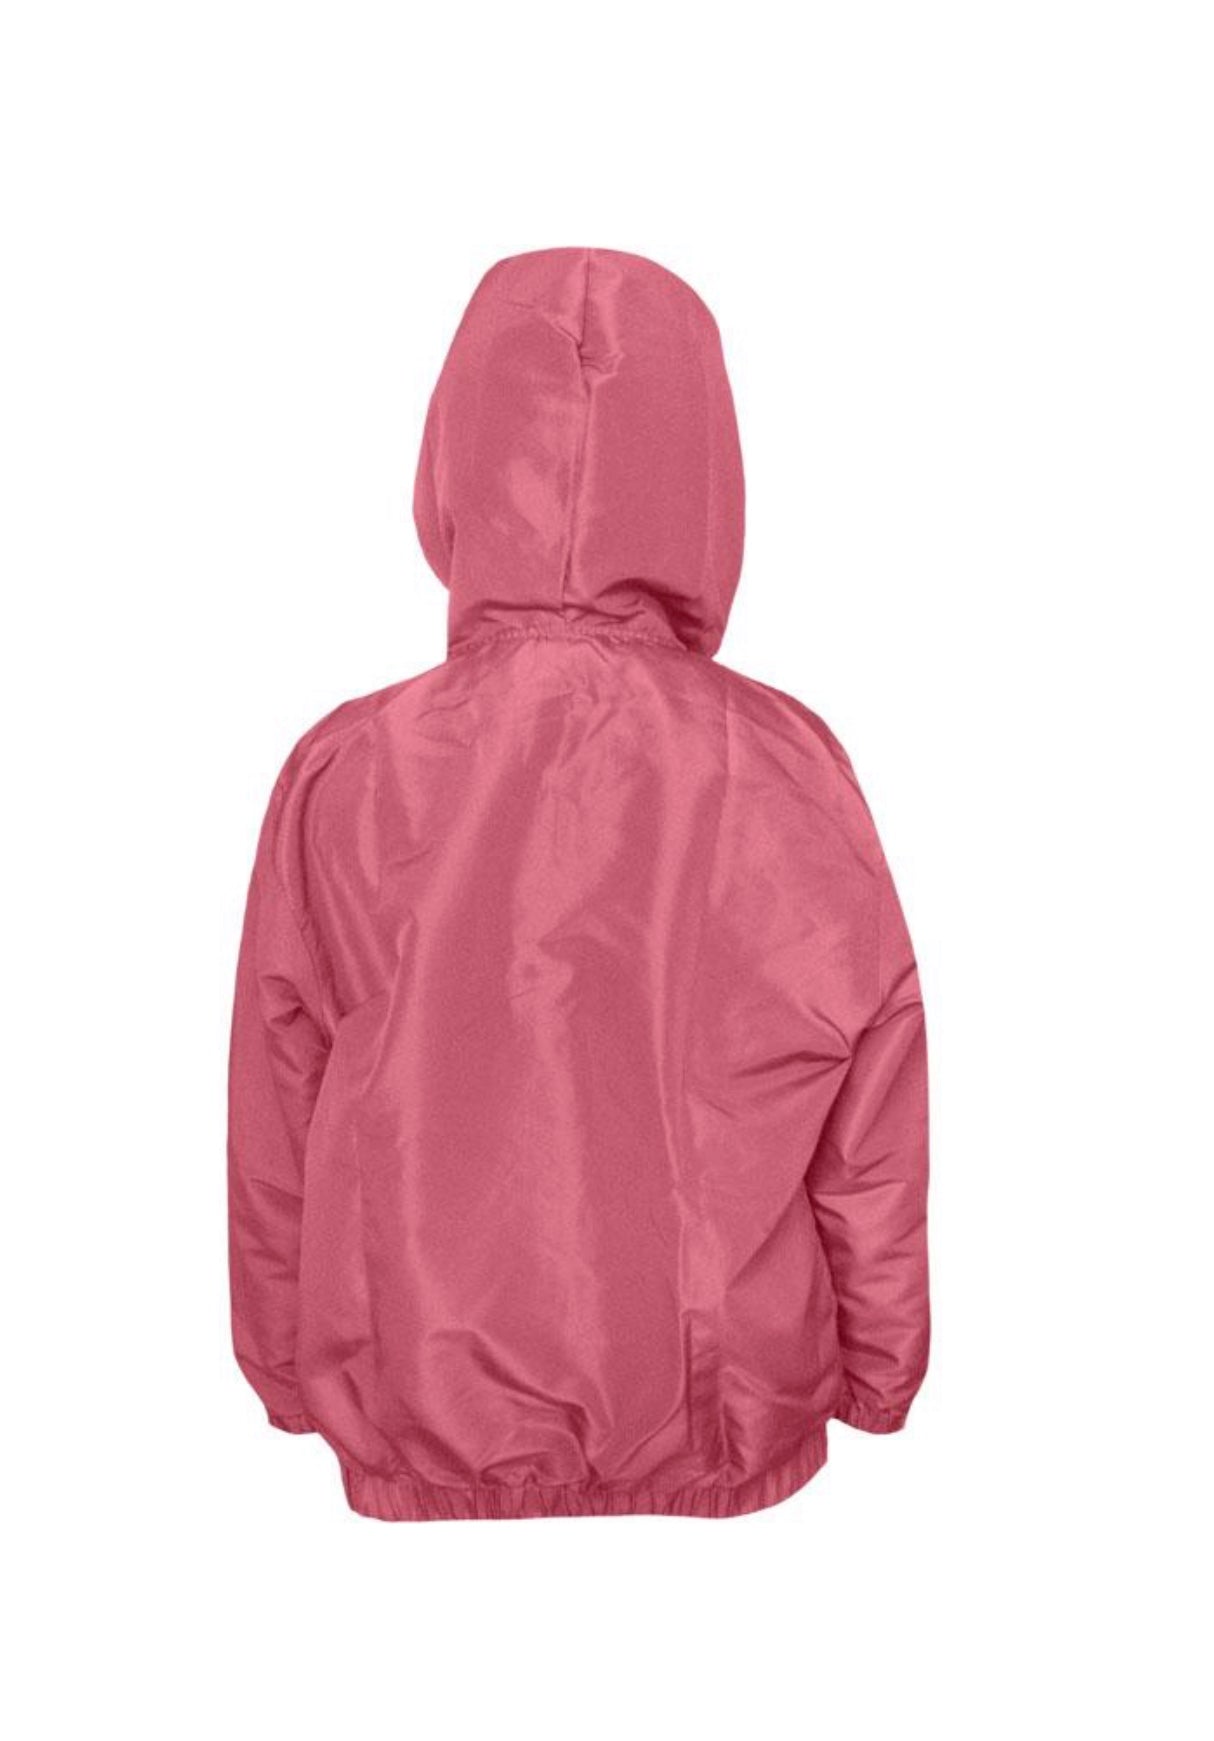 DAILY WEAR FASHION PPE- PROTECTIVE JACKET